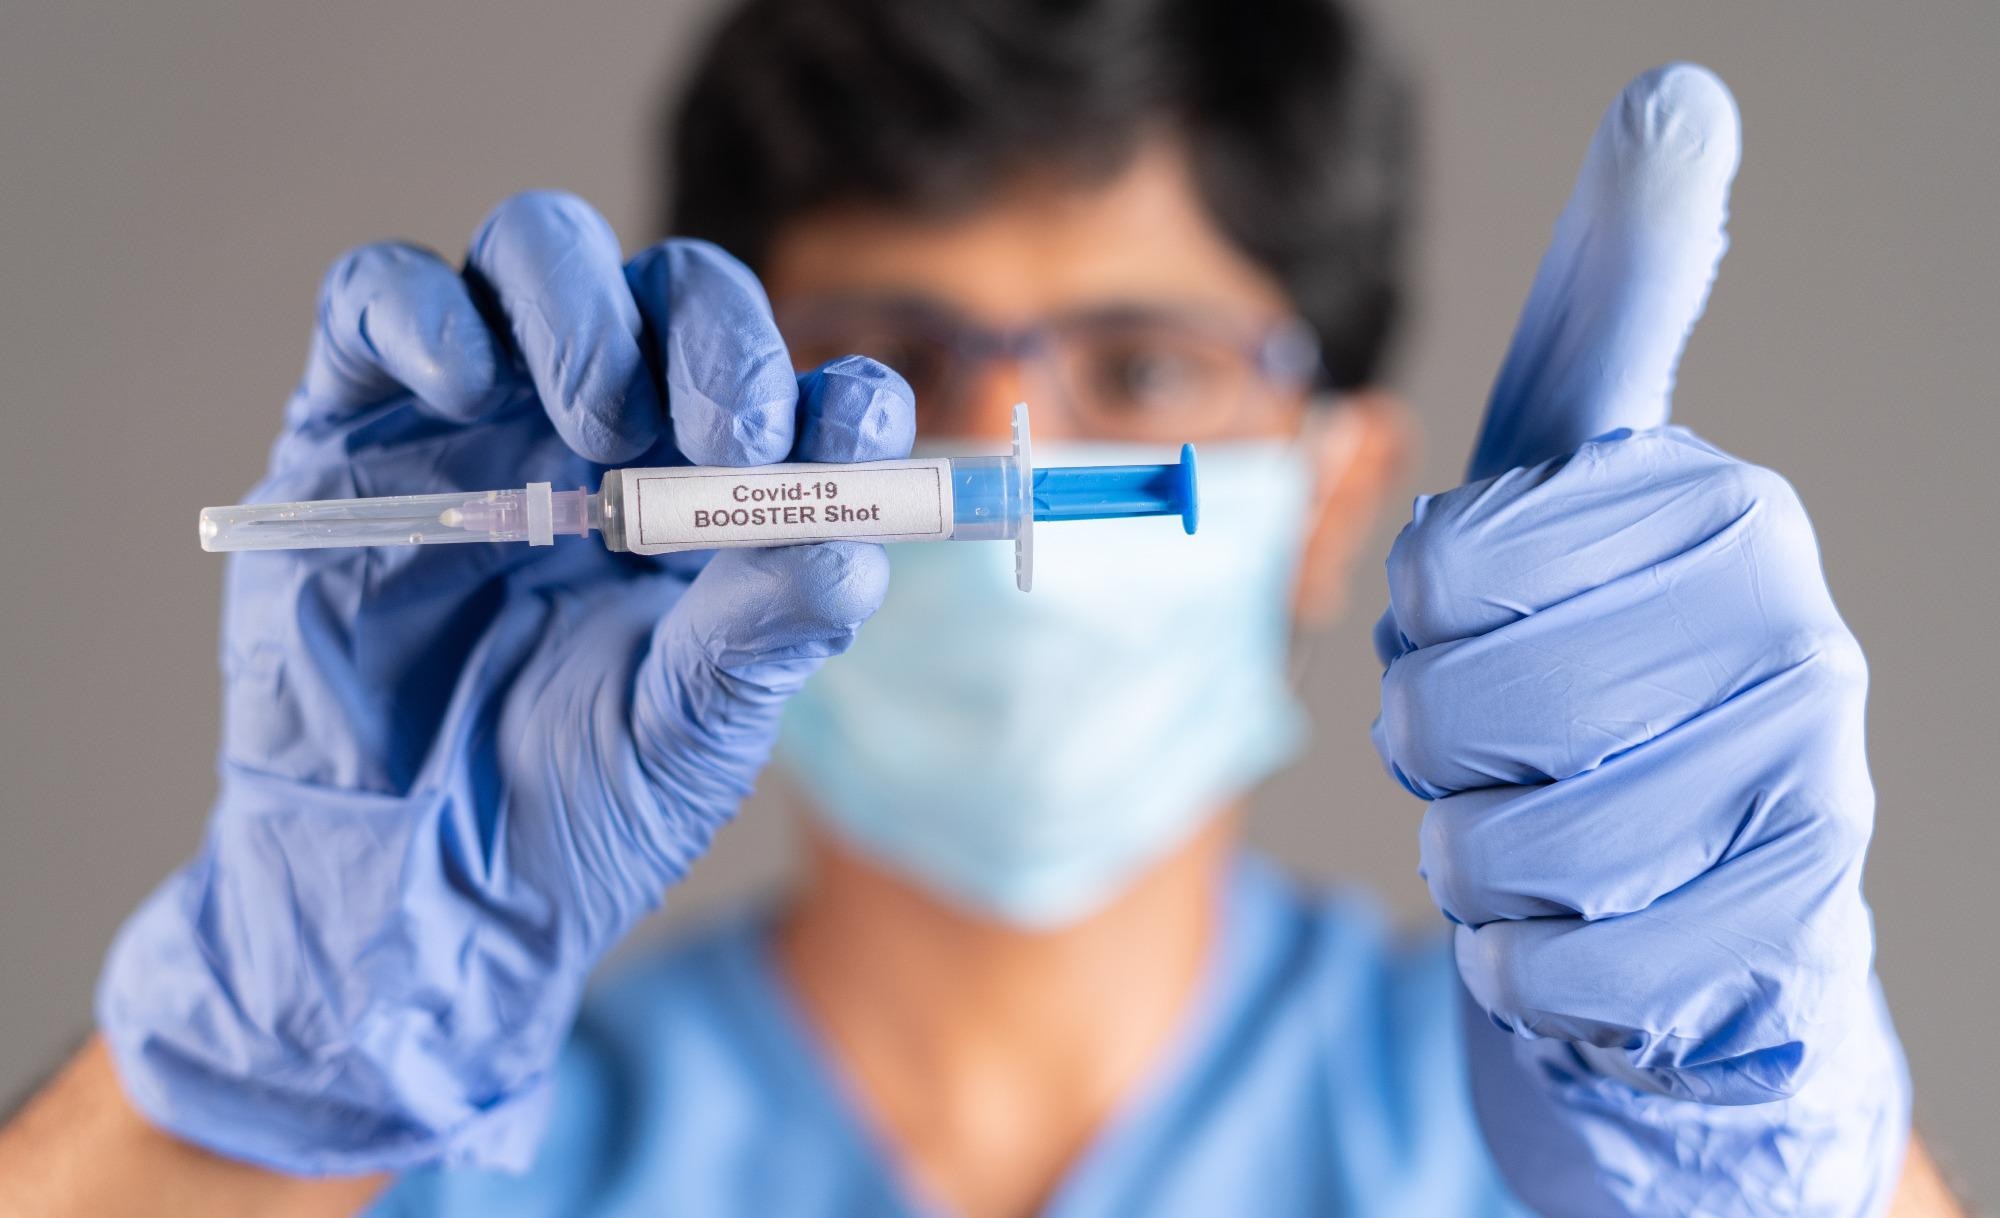 Study: Effectiveness of a second BNT162b2 booster vaccine against hospitalization and death from COVID-19 in adults aged over 60 years. Image Credit: WESTOCK PRODUCTIONS / Shutterstock